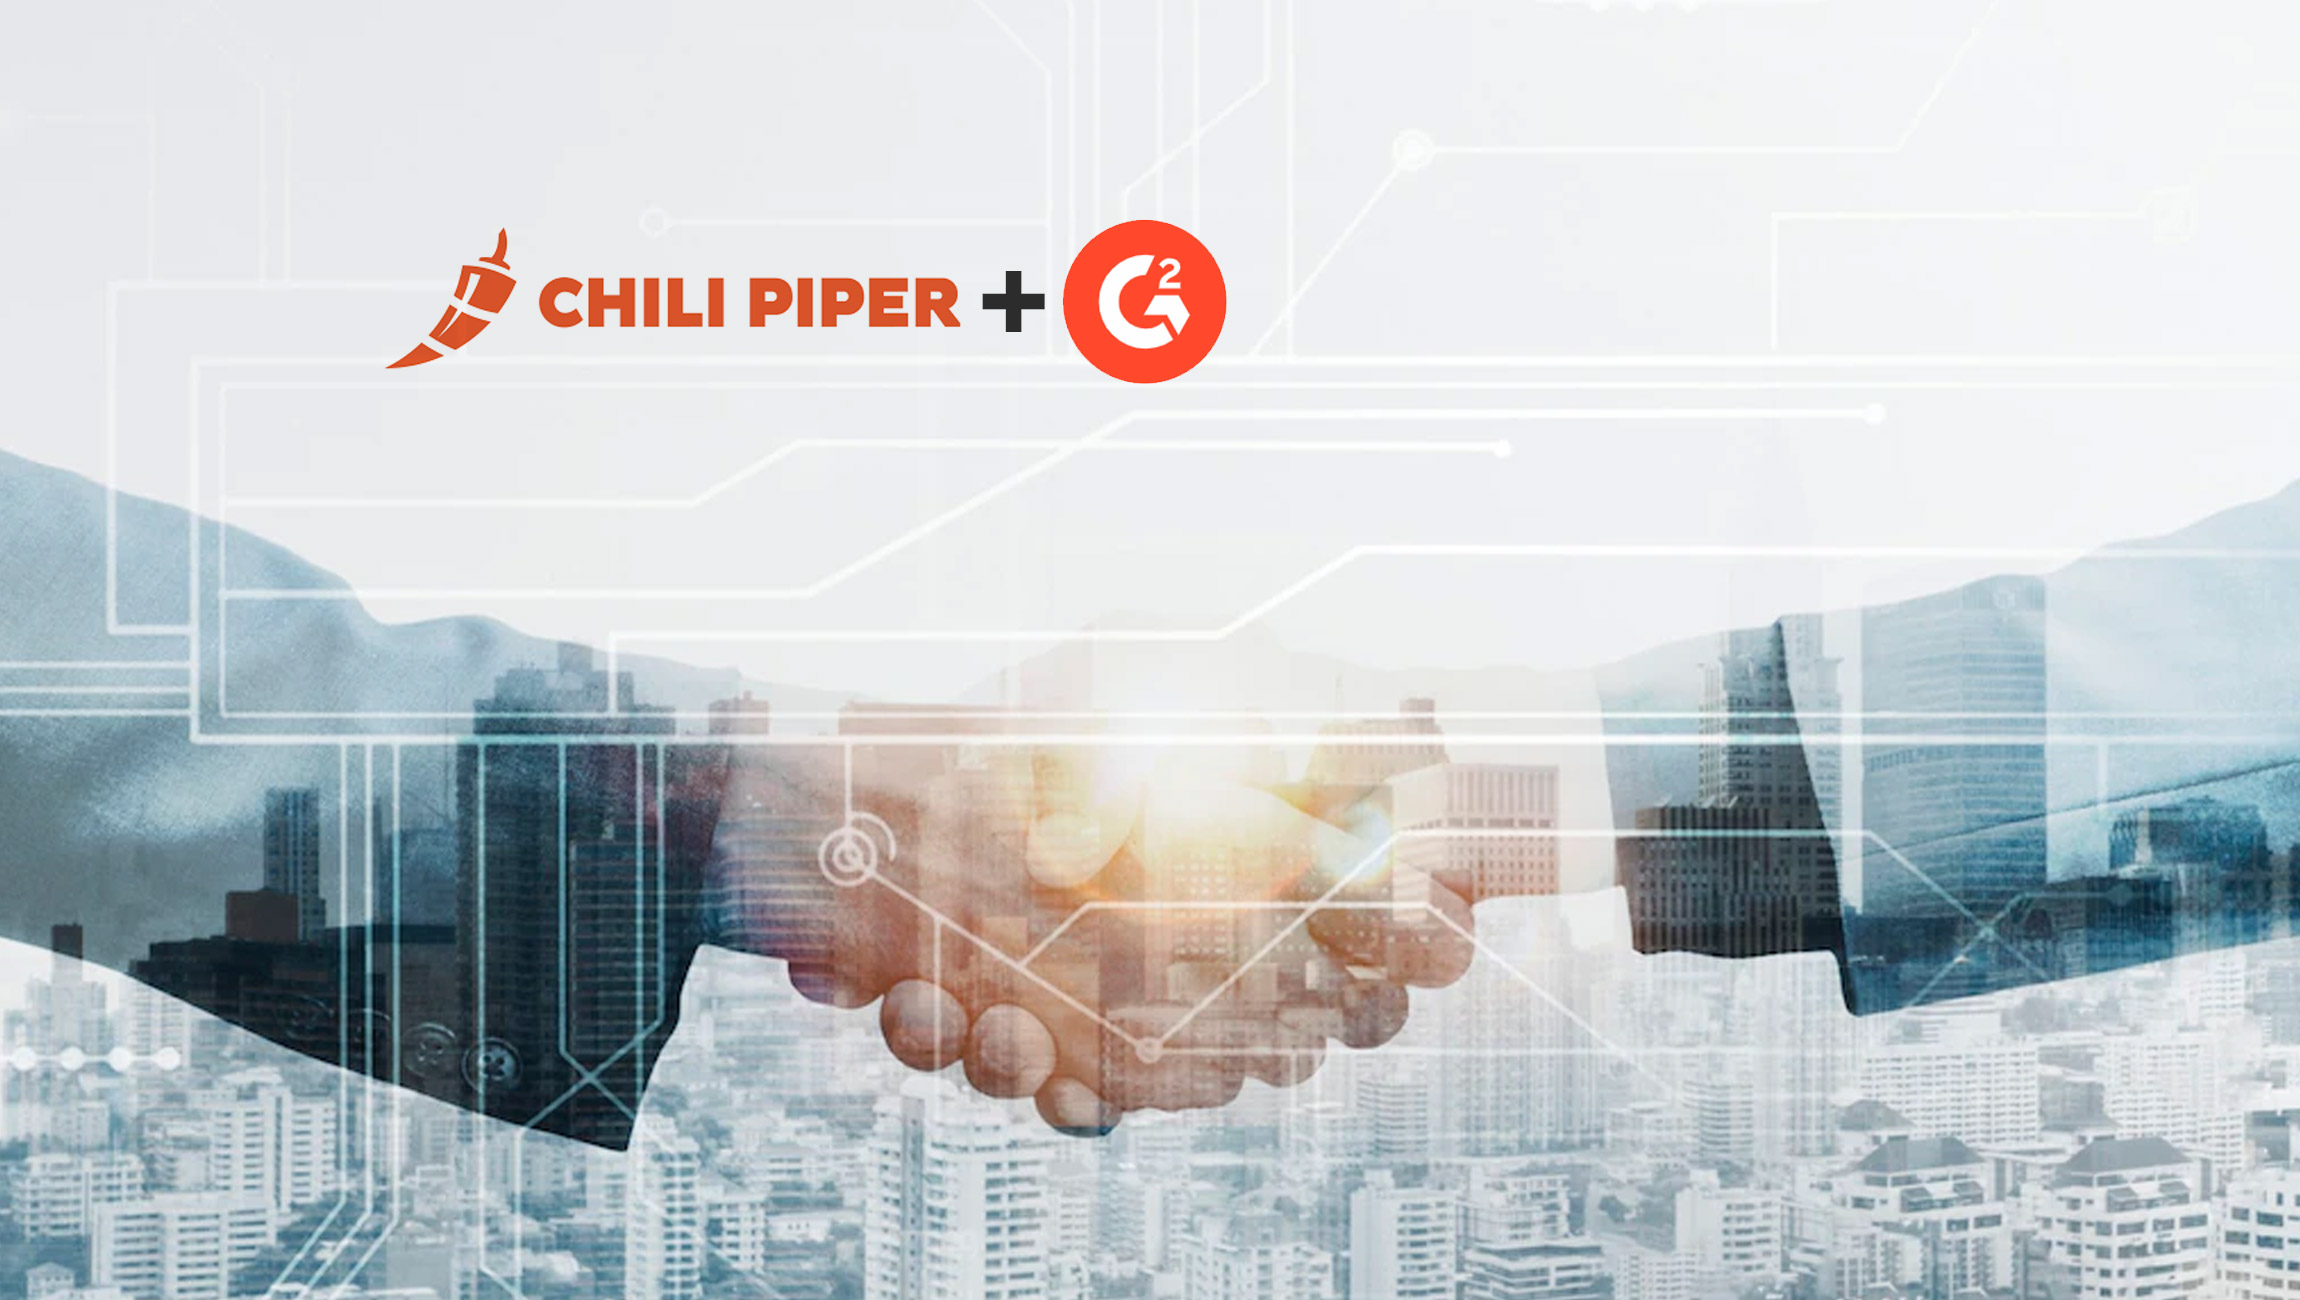 Chili Piper Announces Integration Partnership With G2 to Tap into New Revenue Channel on Software Marketplace